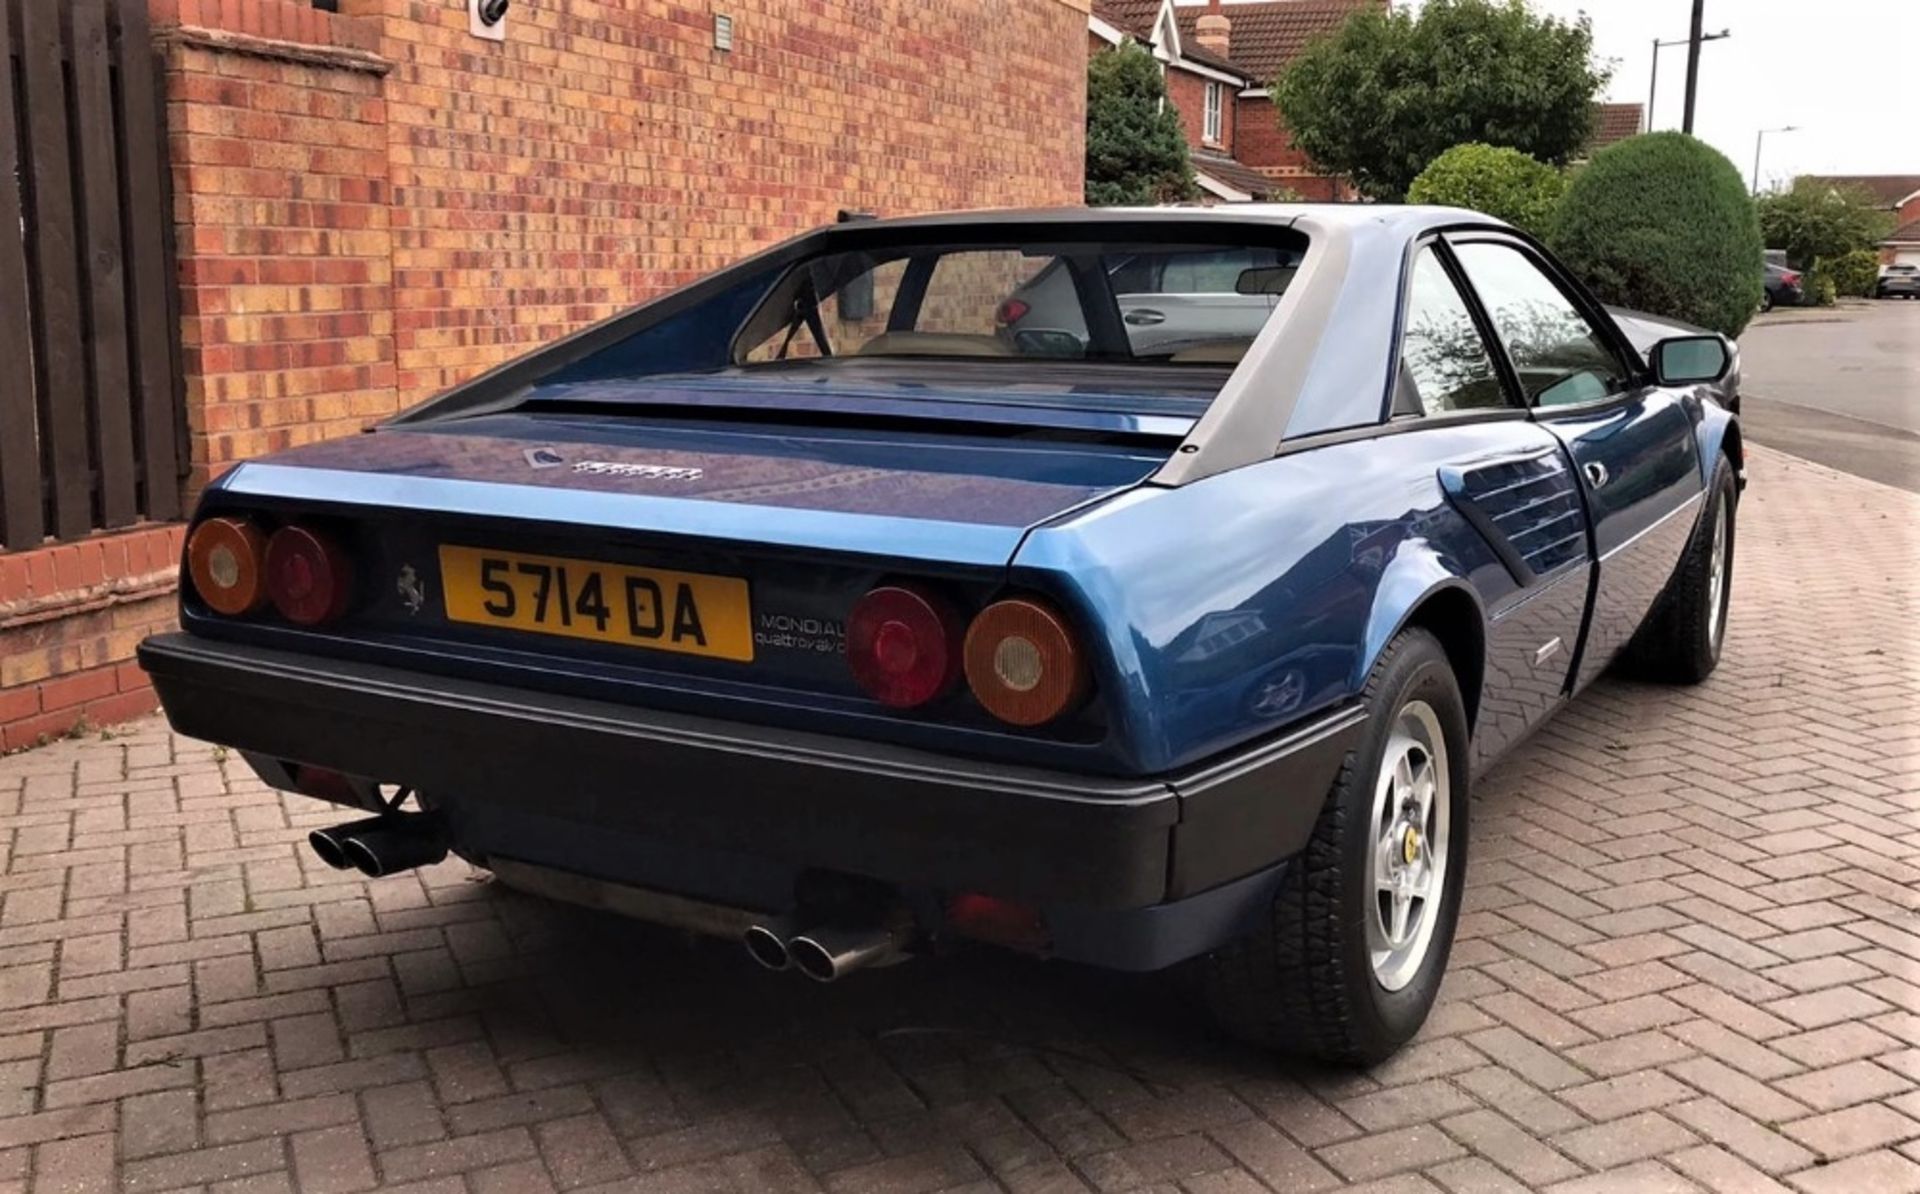 1982 FERRARI MONDIAL COUPE Registration Number: TBA Chassis Number: ZFFLD14B000044063 Recorded - Image 4 of 14